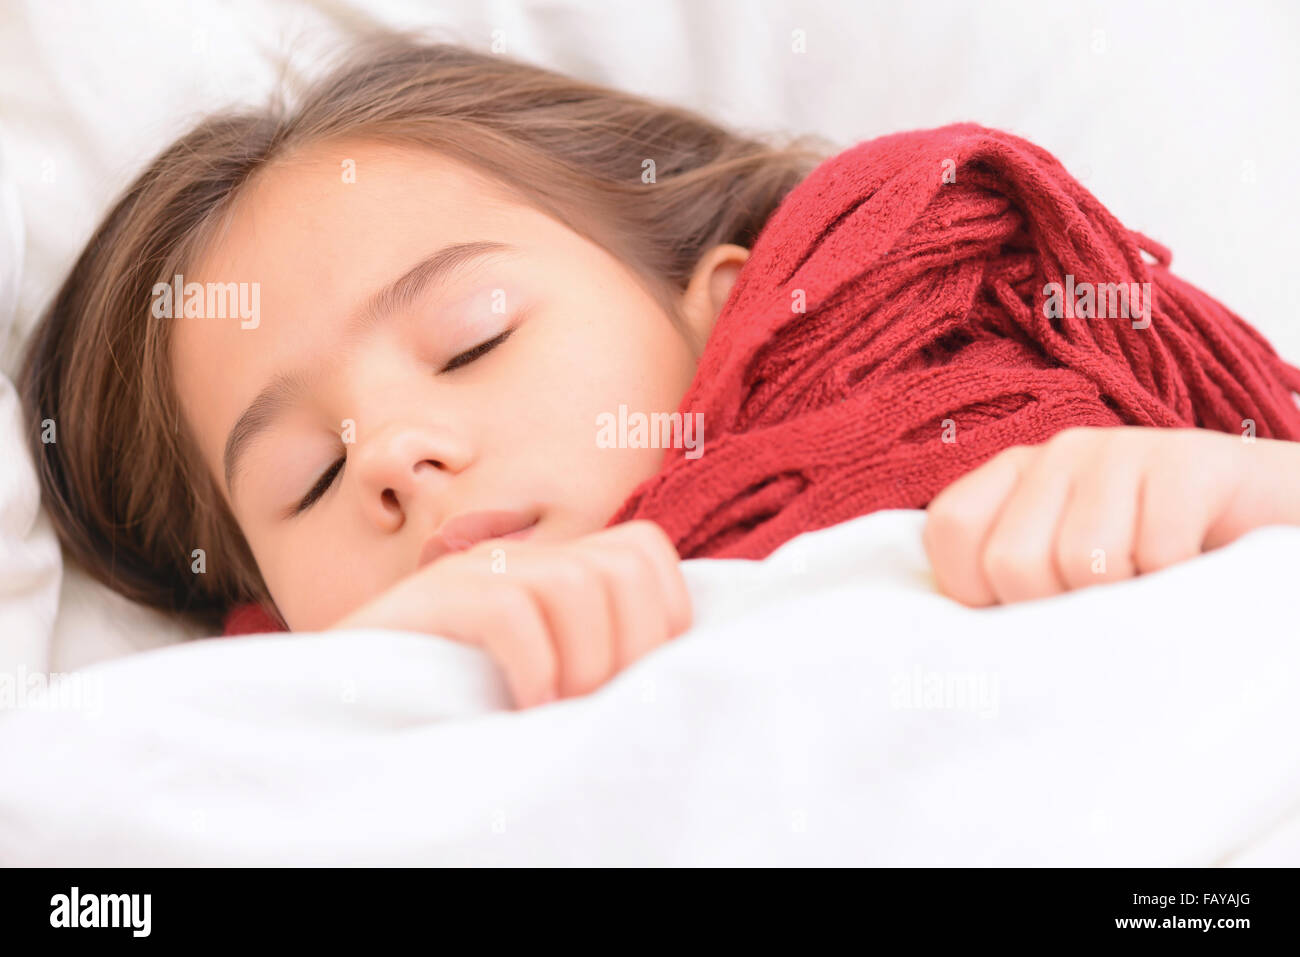 Little girl Lying in Bed Banque D'Images